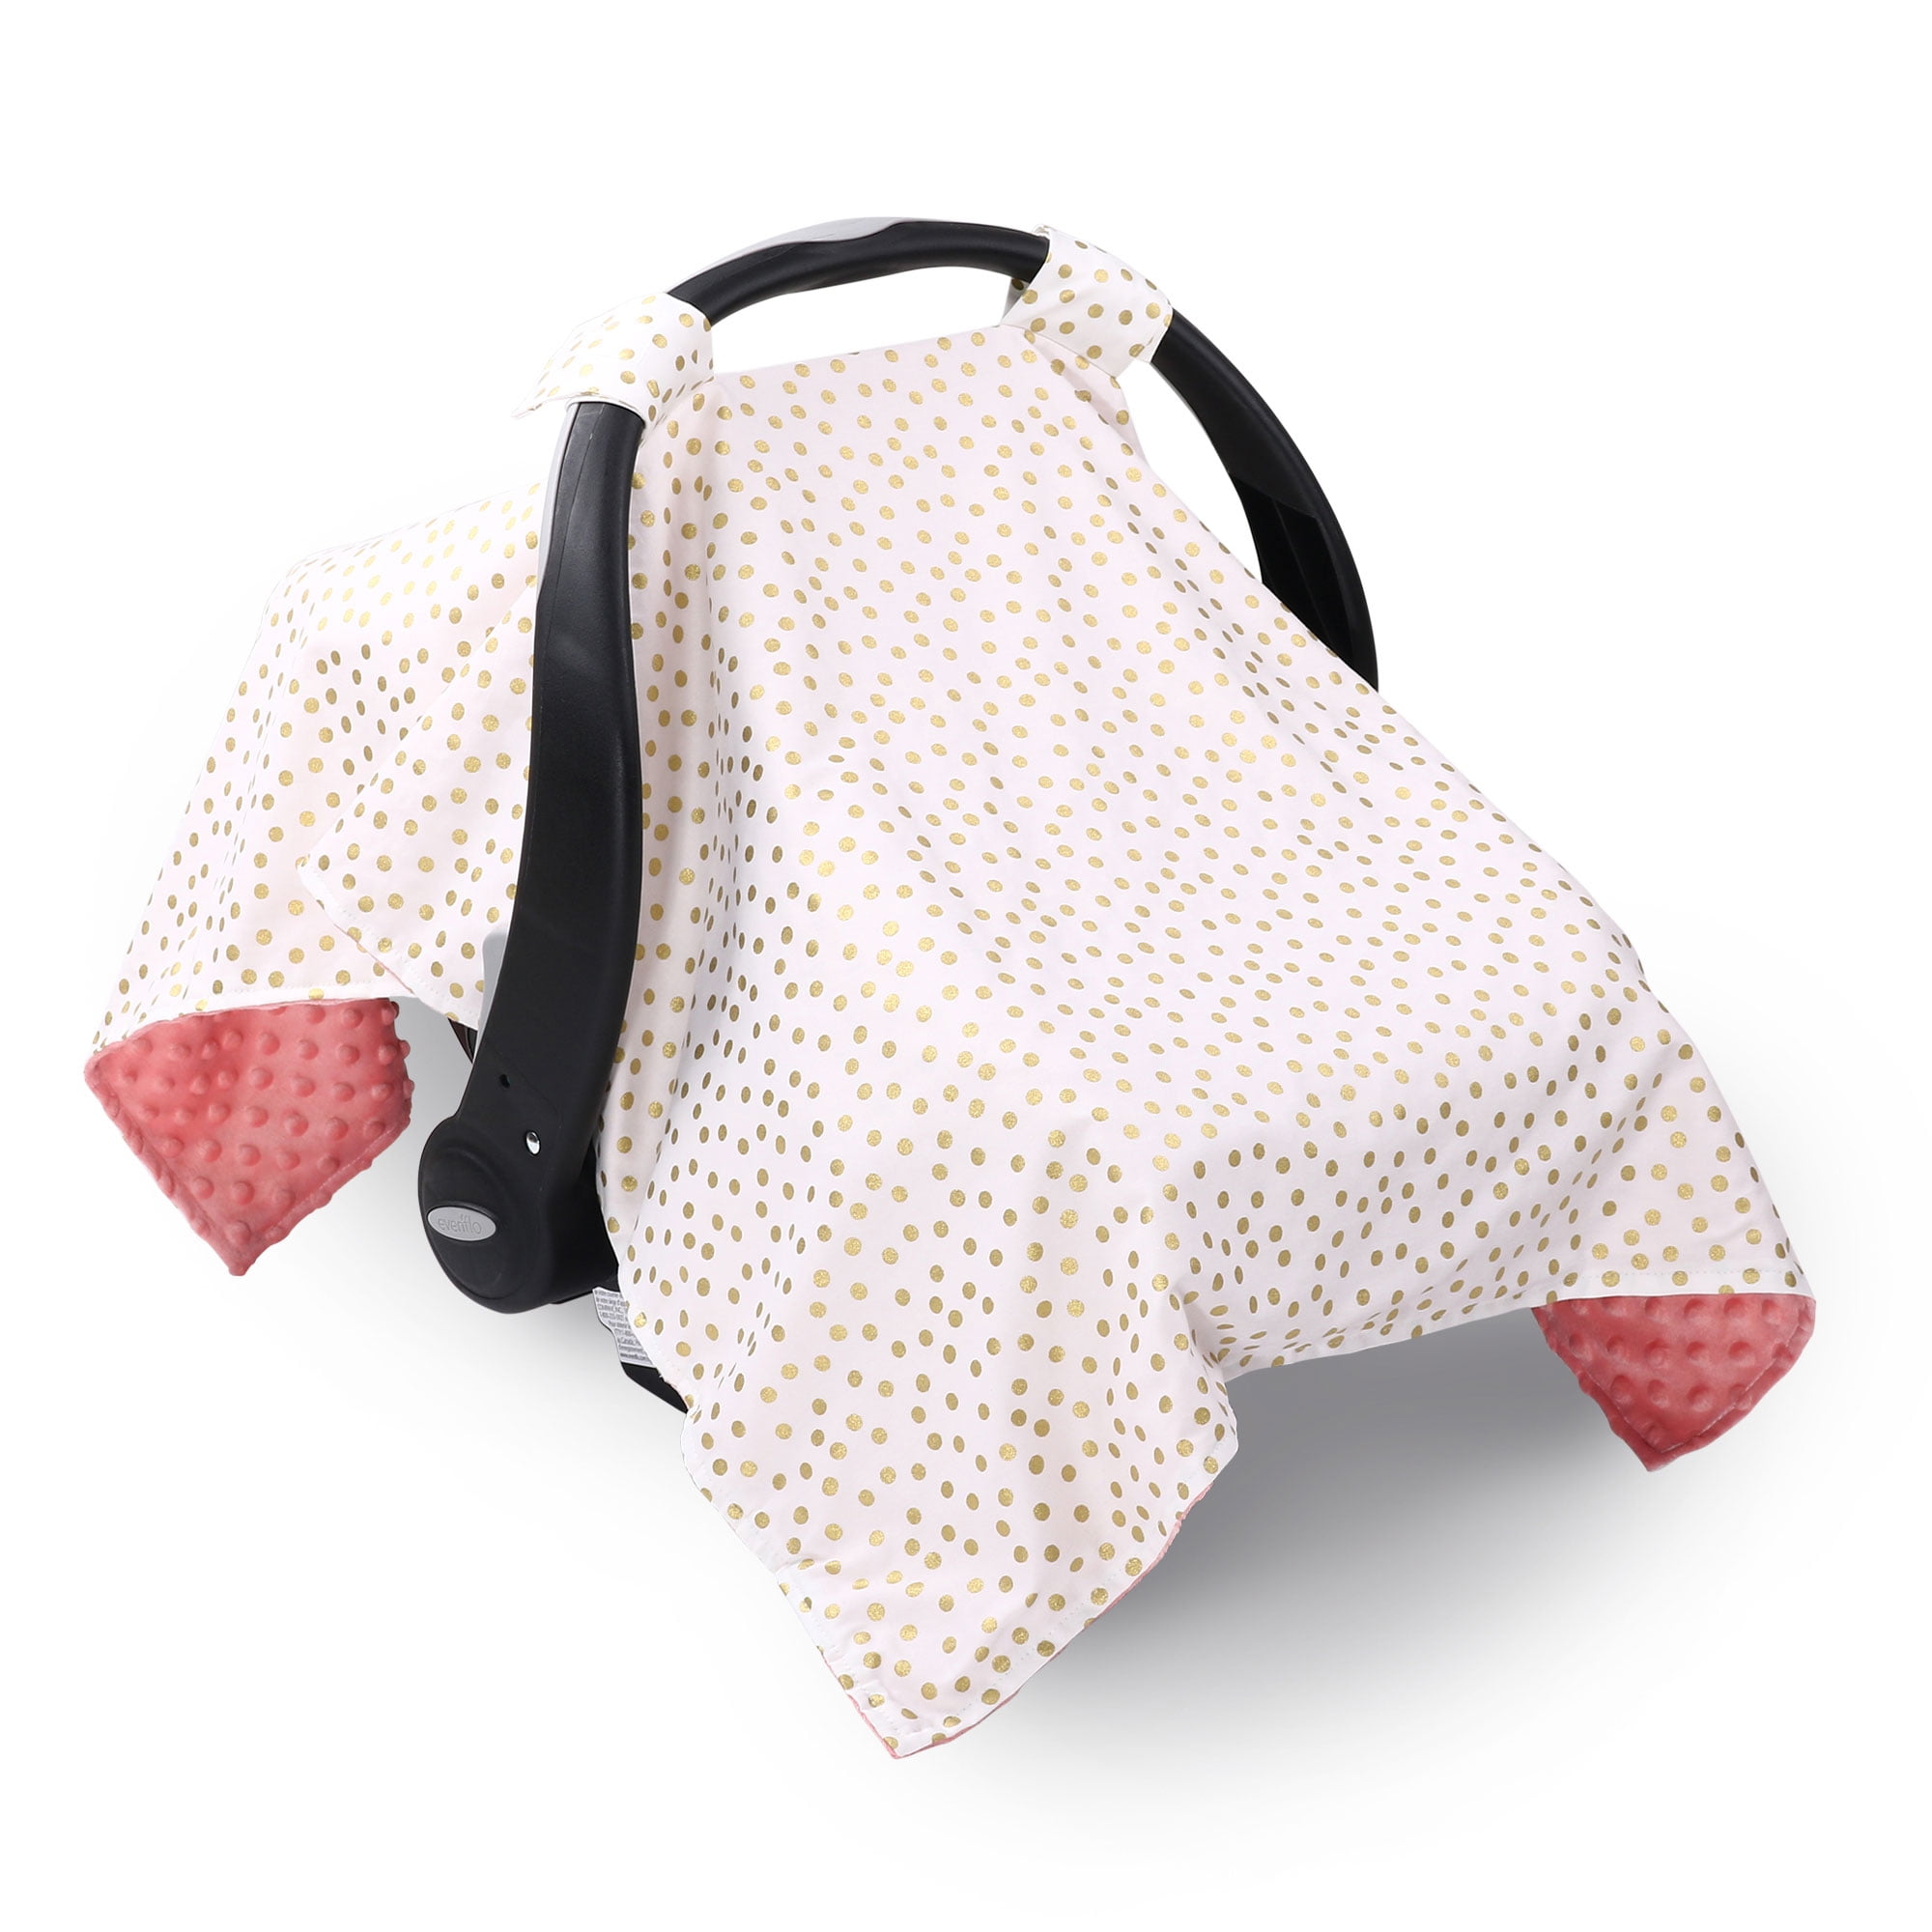 Metallic Gold Dot Car Seat and Baby Carrier Cushion by The Peanut Shell 